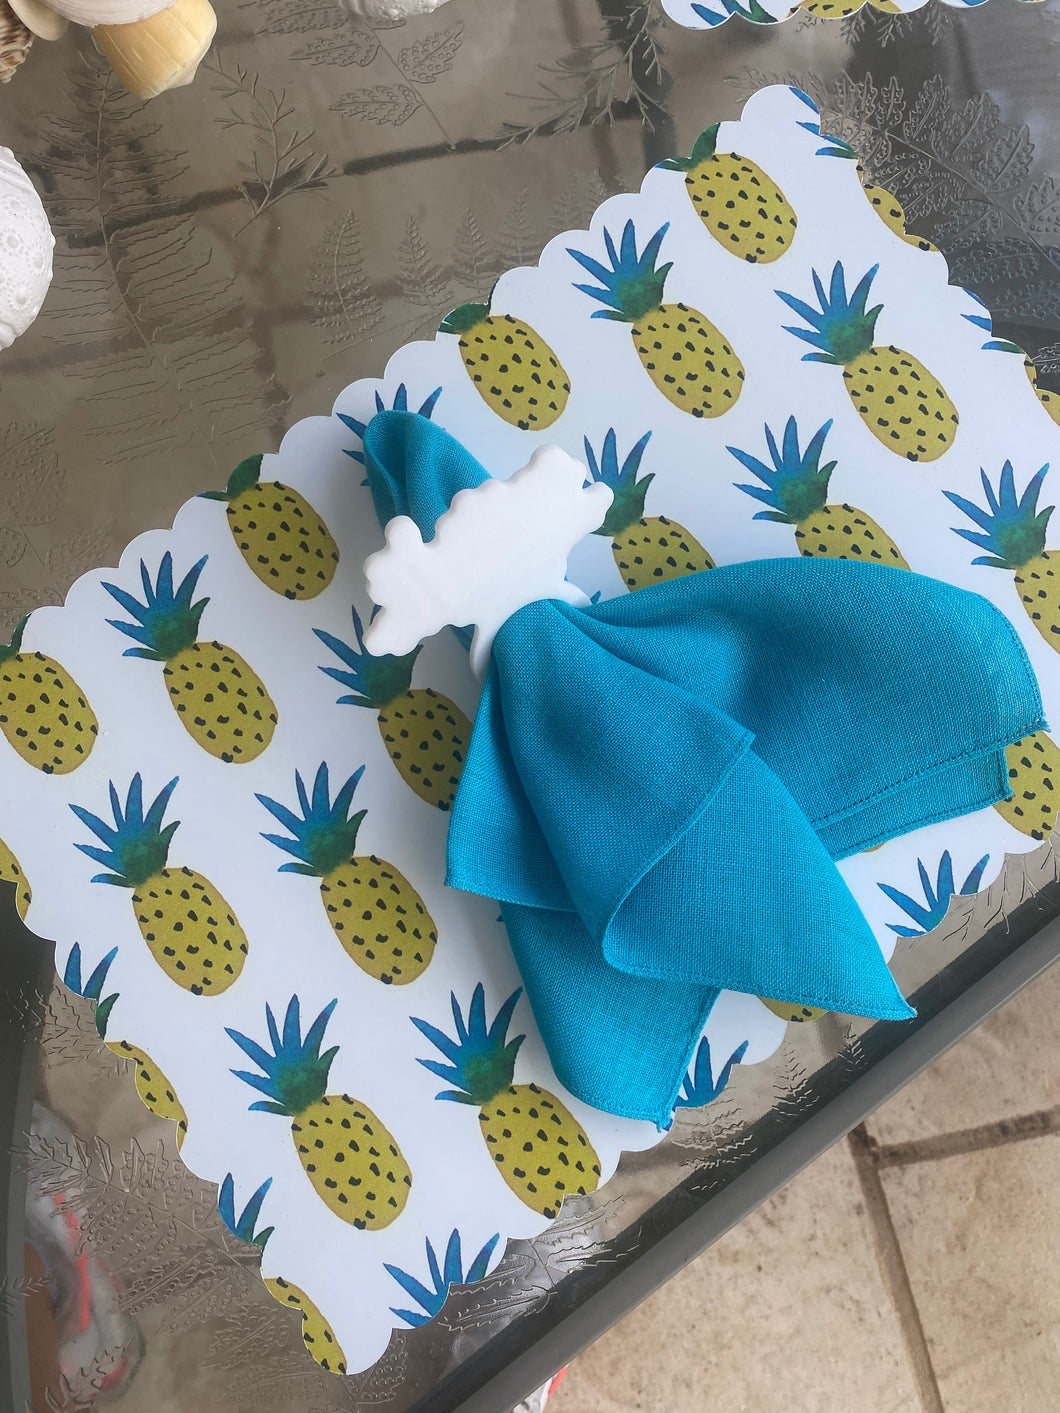 Pineapple Placemats, Outdoor Decor, Housewarming Gift, Hostess Gift, Wedding Gift, Gift for her, Summer Party, Summer Decor, Table Setting